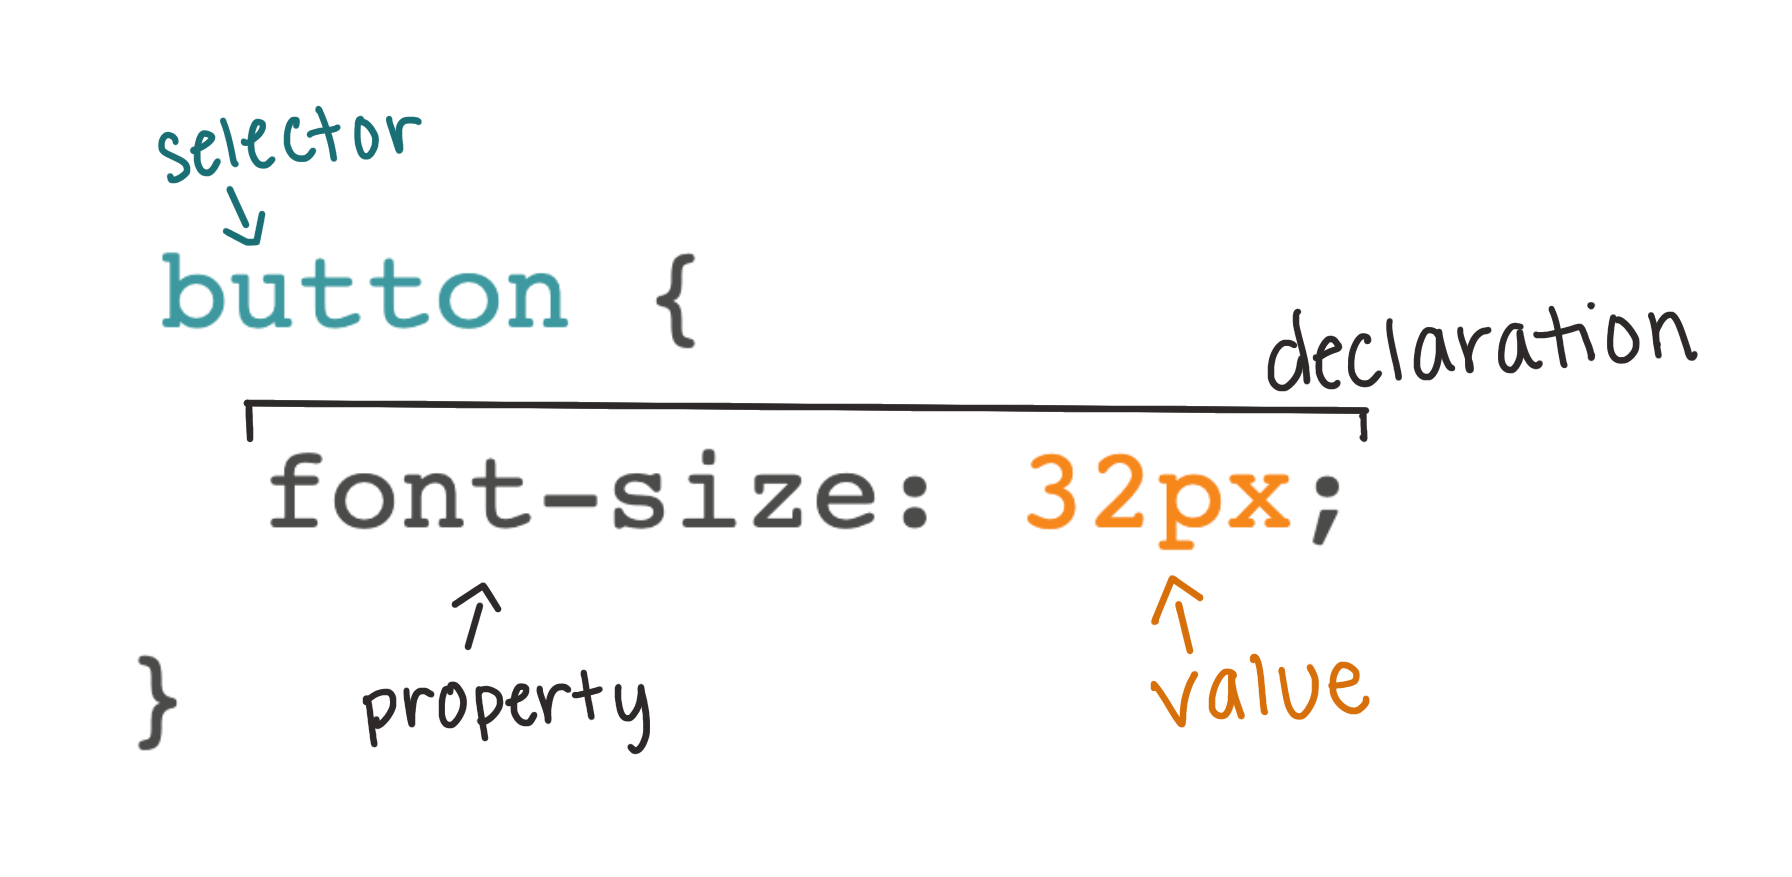 A CSS rule for a button with a color of #333333 and font-size of 32px. The button is labeled selector, color: #333333 is labeled declaration, font-size: is labeled property and 32px is labeled value.